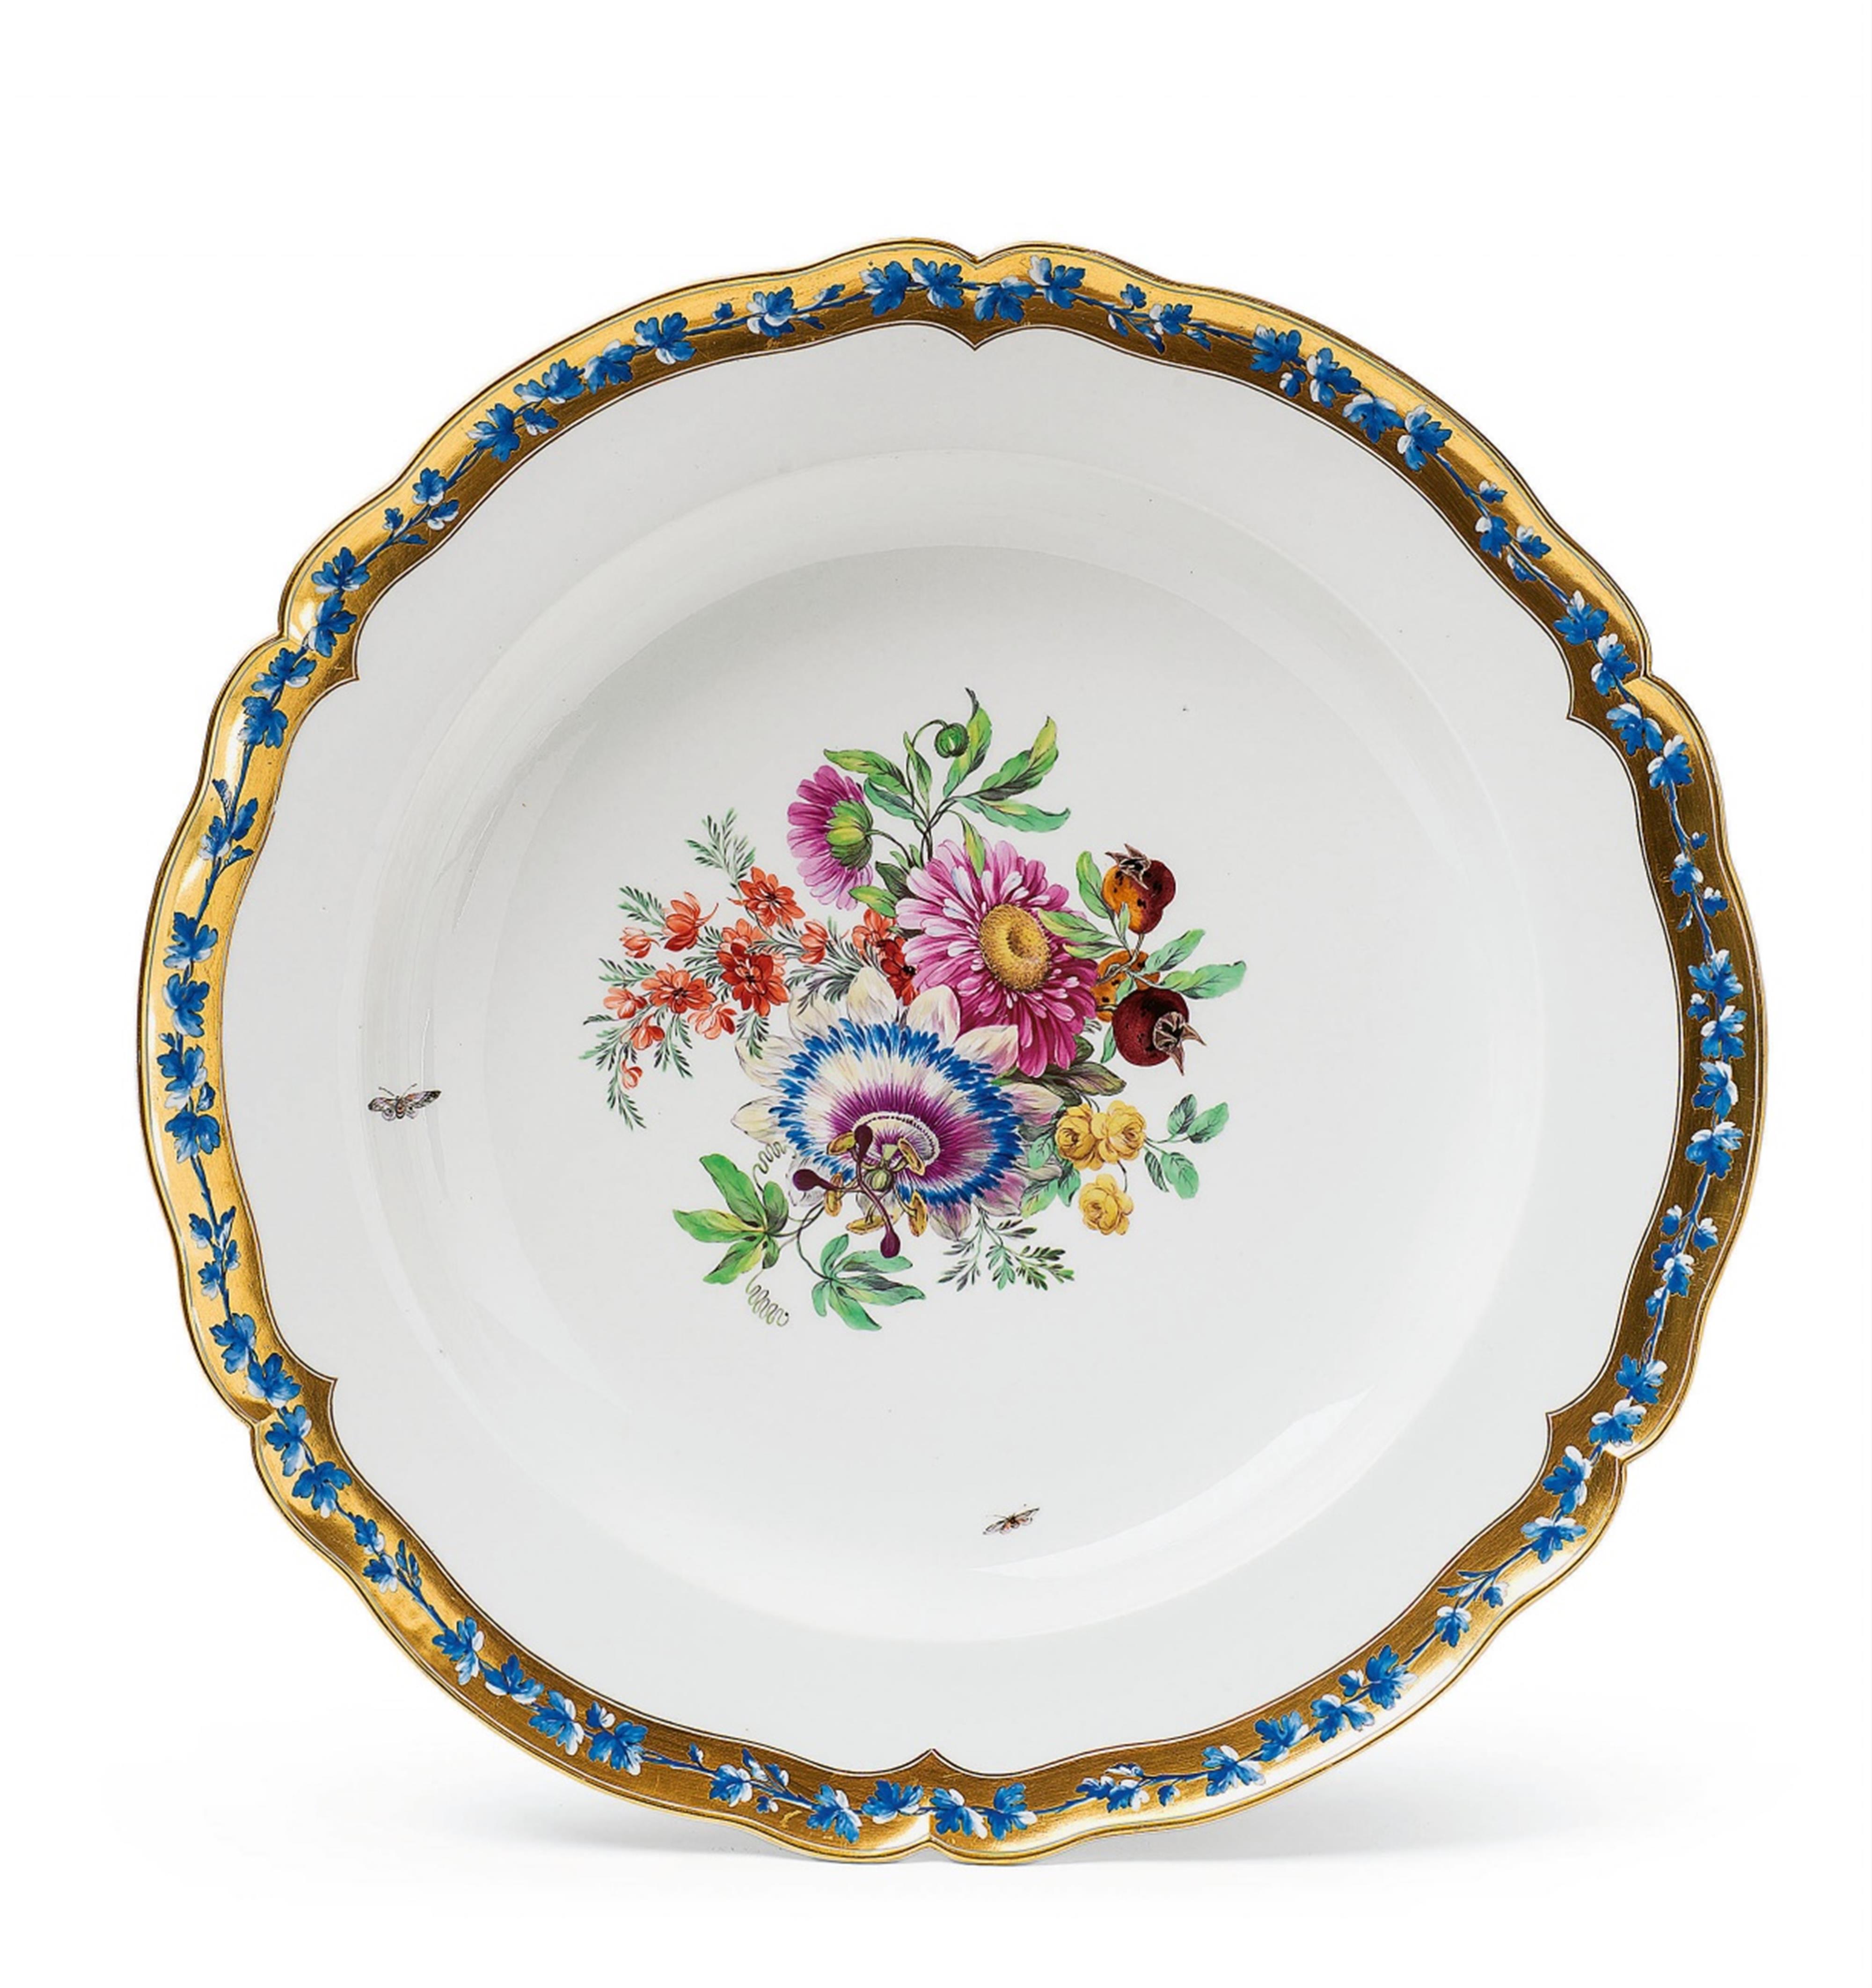 Platter from a Berlin KPM porcelain dinner service exhibited at the Academy in 1788 - image-1